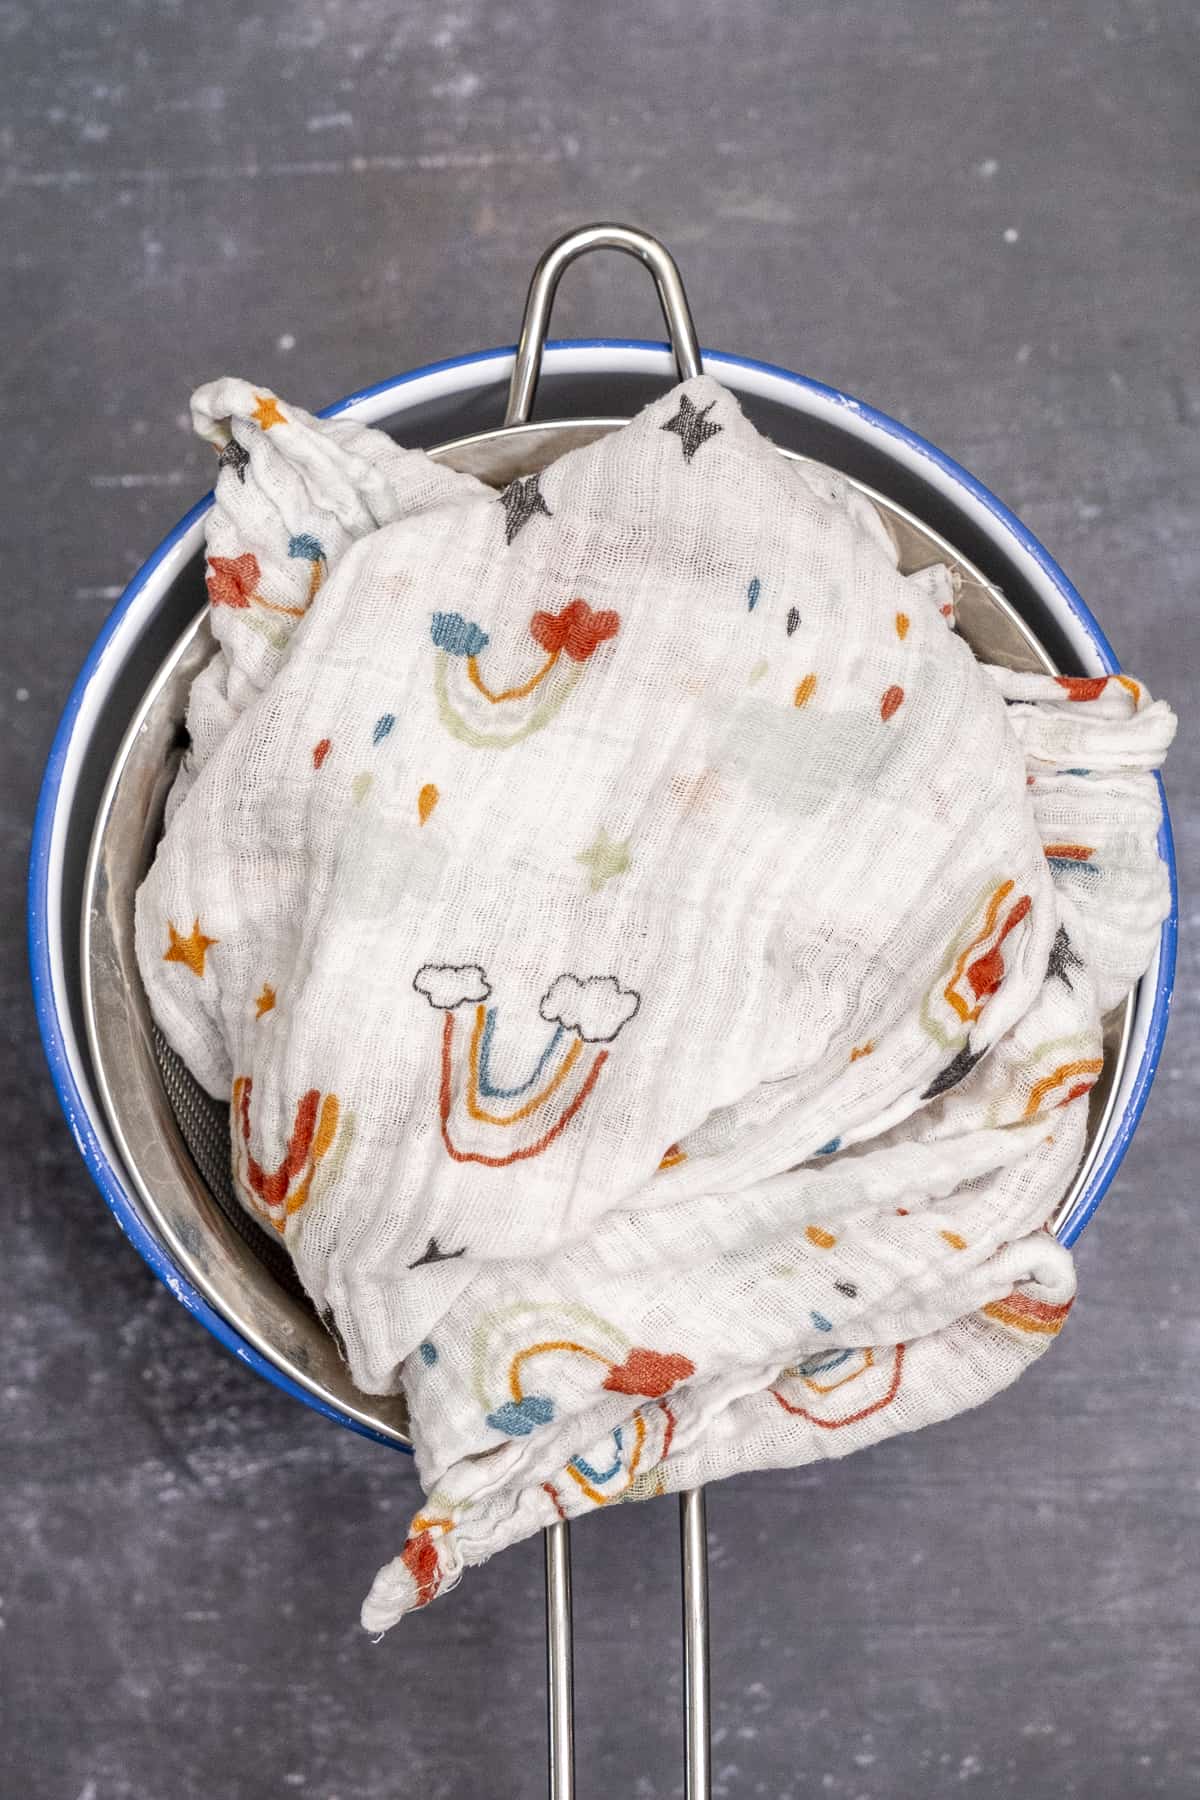 Baby muslin folded on the yogurt in a strainer over a large bowl.